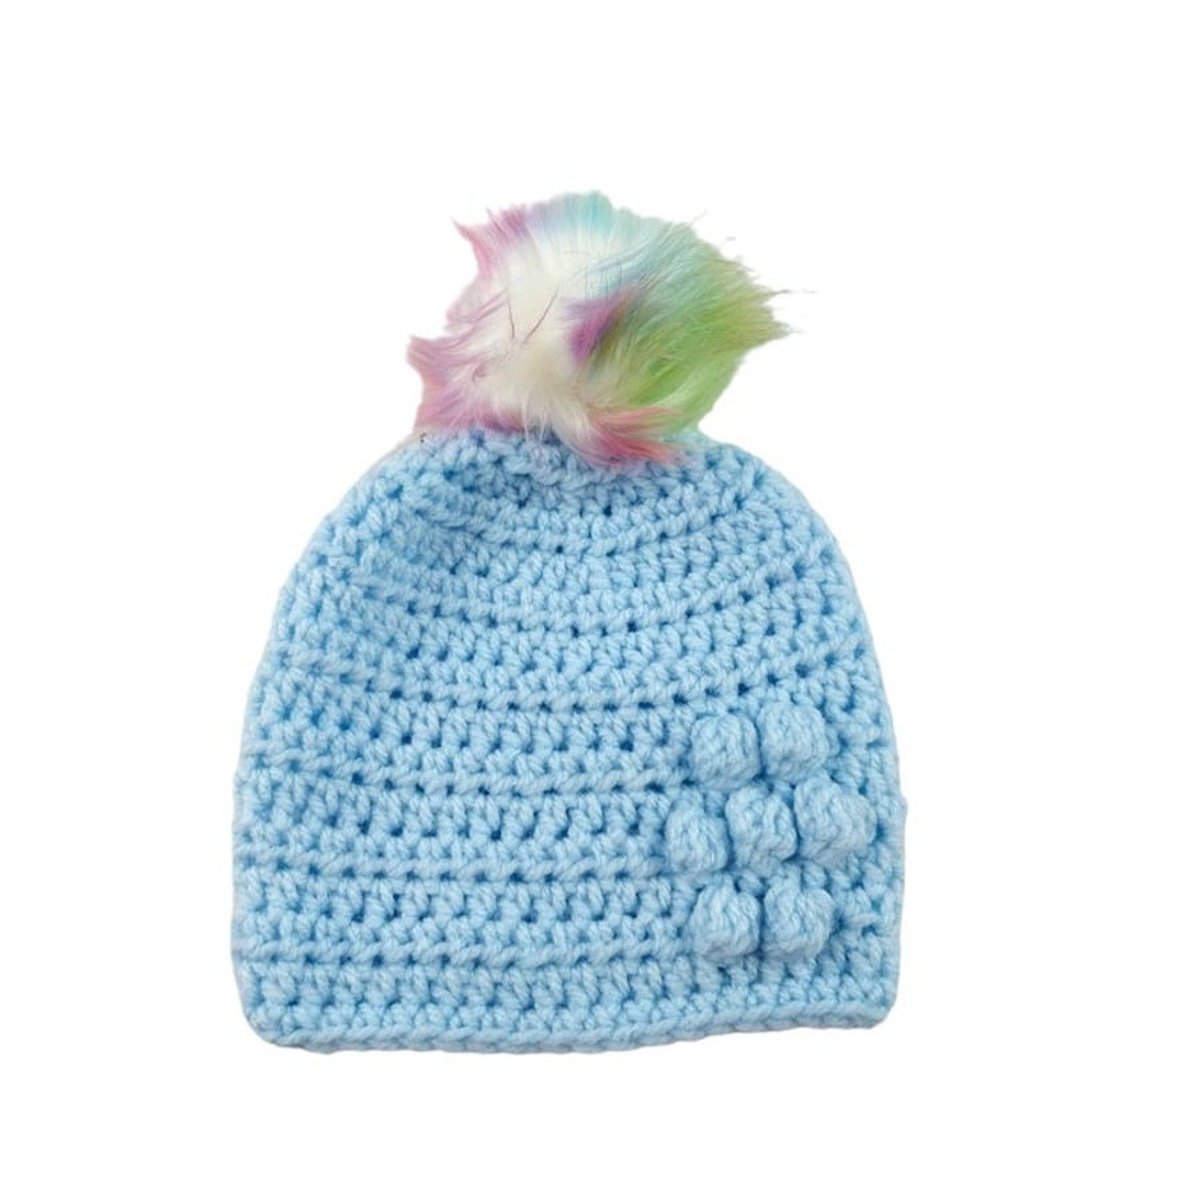 Wrap your bundle of joy in style with our blue crocheted baby hat! It features a lovely flower detail and detachable faux fur pompoms in vibrant hues. Shop now on #Etsy! knittingtopia.etsy.com/listing/140322… #knittingtopia #Handmade #BabyFashion #MHHSBD #craftbizparty